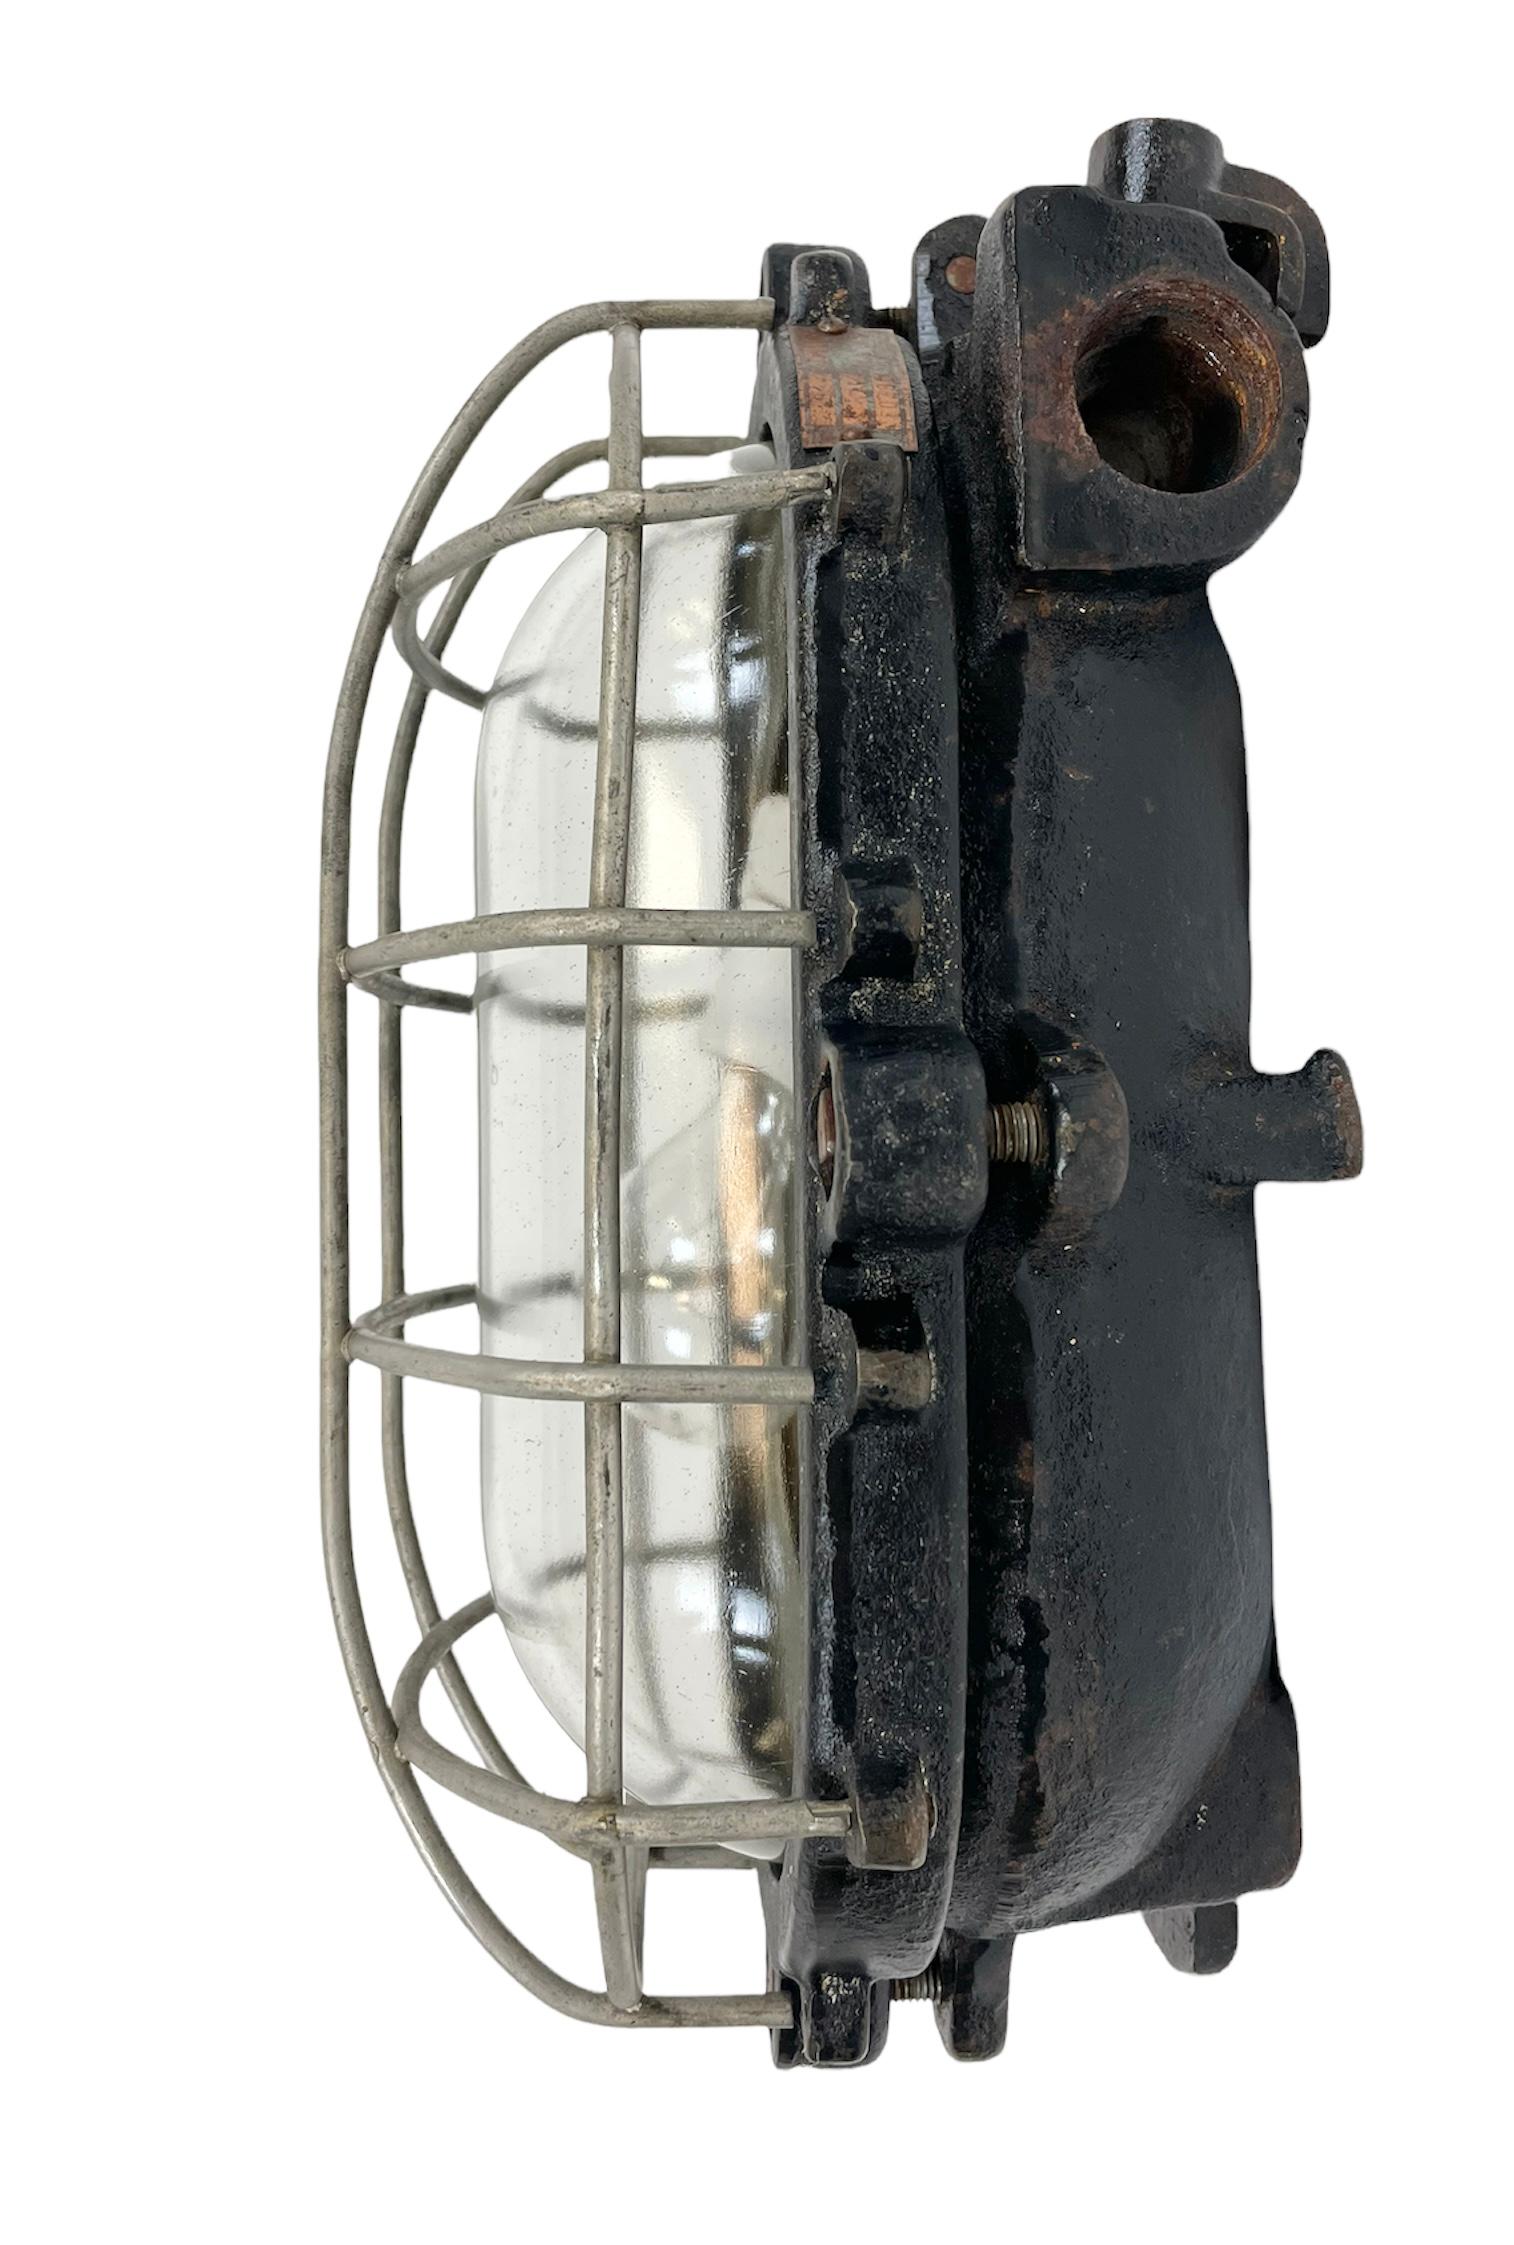 Industrial wall light made by Elektrosvit in former Czechoslovakia during the 1960s. It features a cast iron body, a clear glass cover and a steel grid.The porcelain socket requires E 27 light bulbs. New wire. The weight of the light is 7 kg.